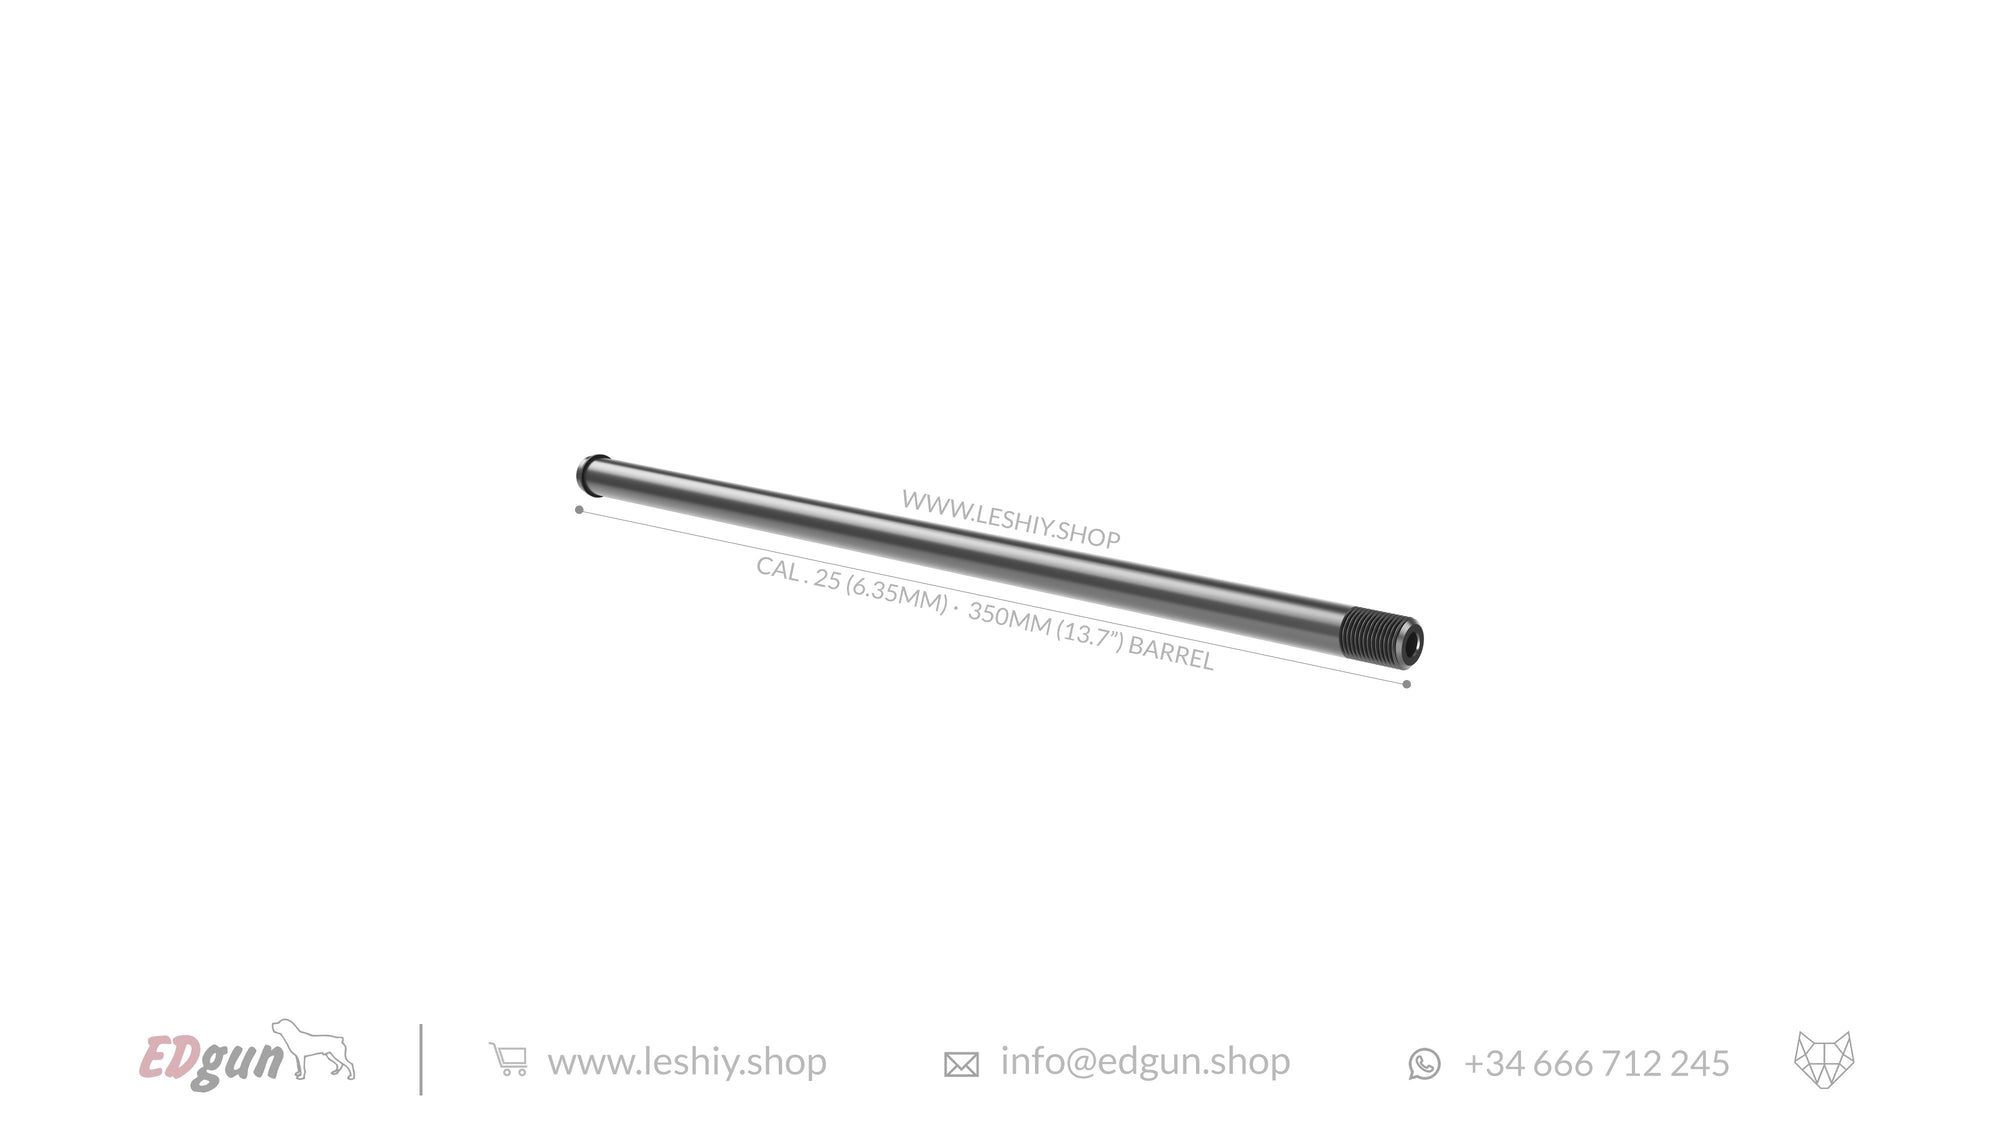 Barrels Lothar Walther cal. 25 (6.35mm) - 350mm (13.7¨) for Leshiy 2